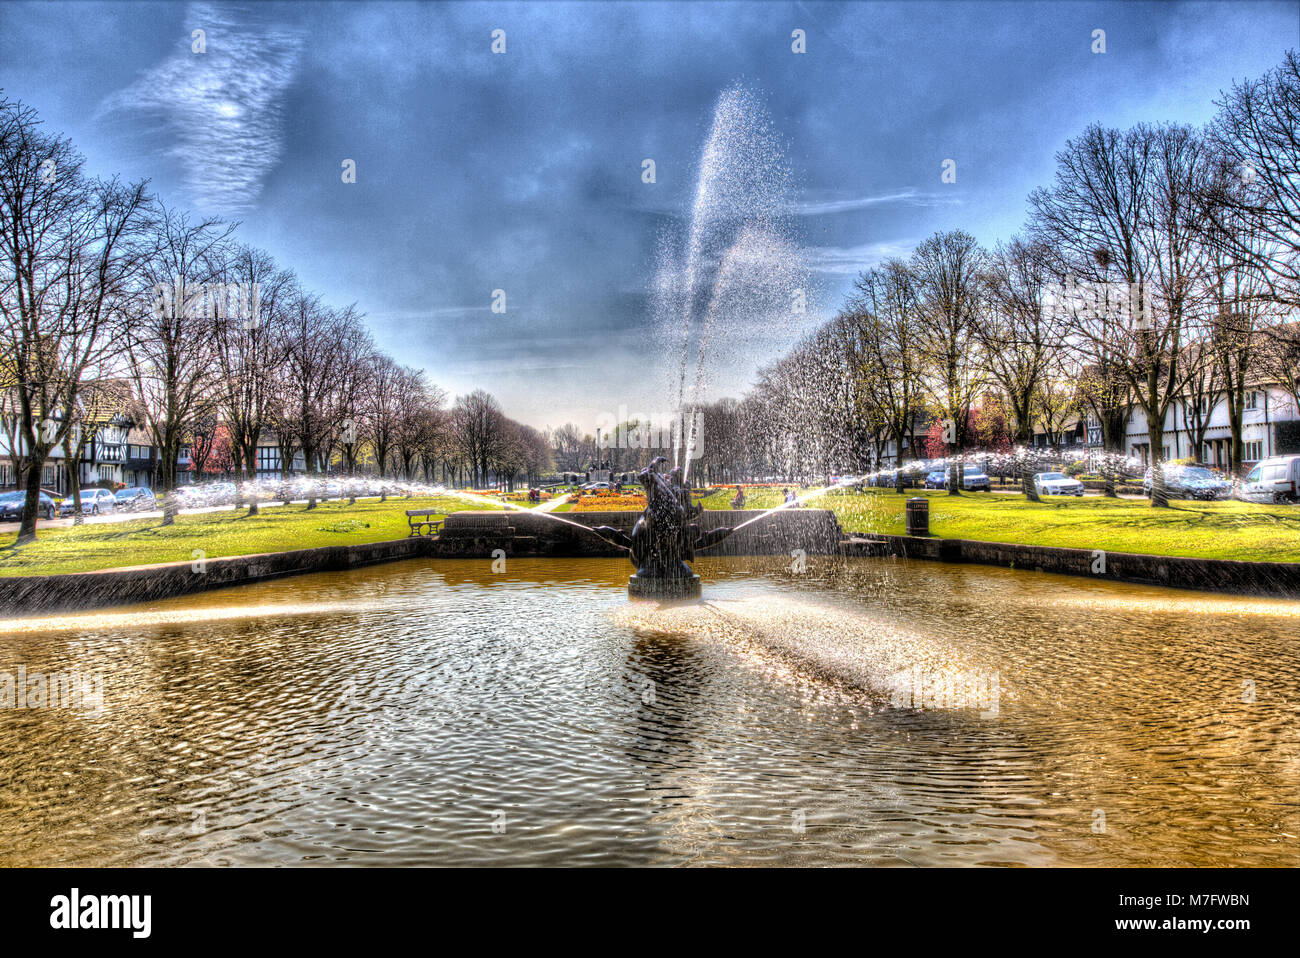 Village of Port Sunlight, England. Artistic view of the Sir Charles Thomas Wheeler sculpted water fountain. Stock Photo